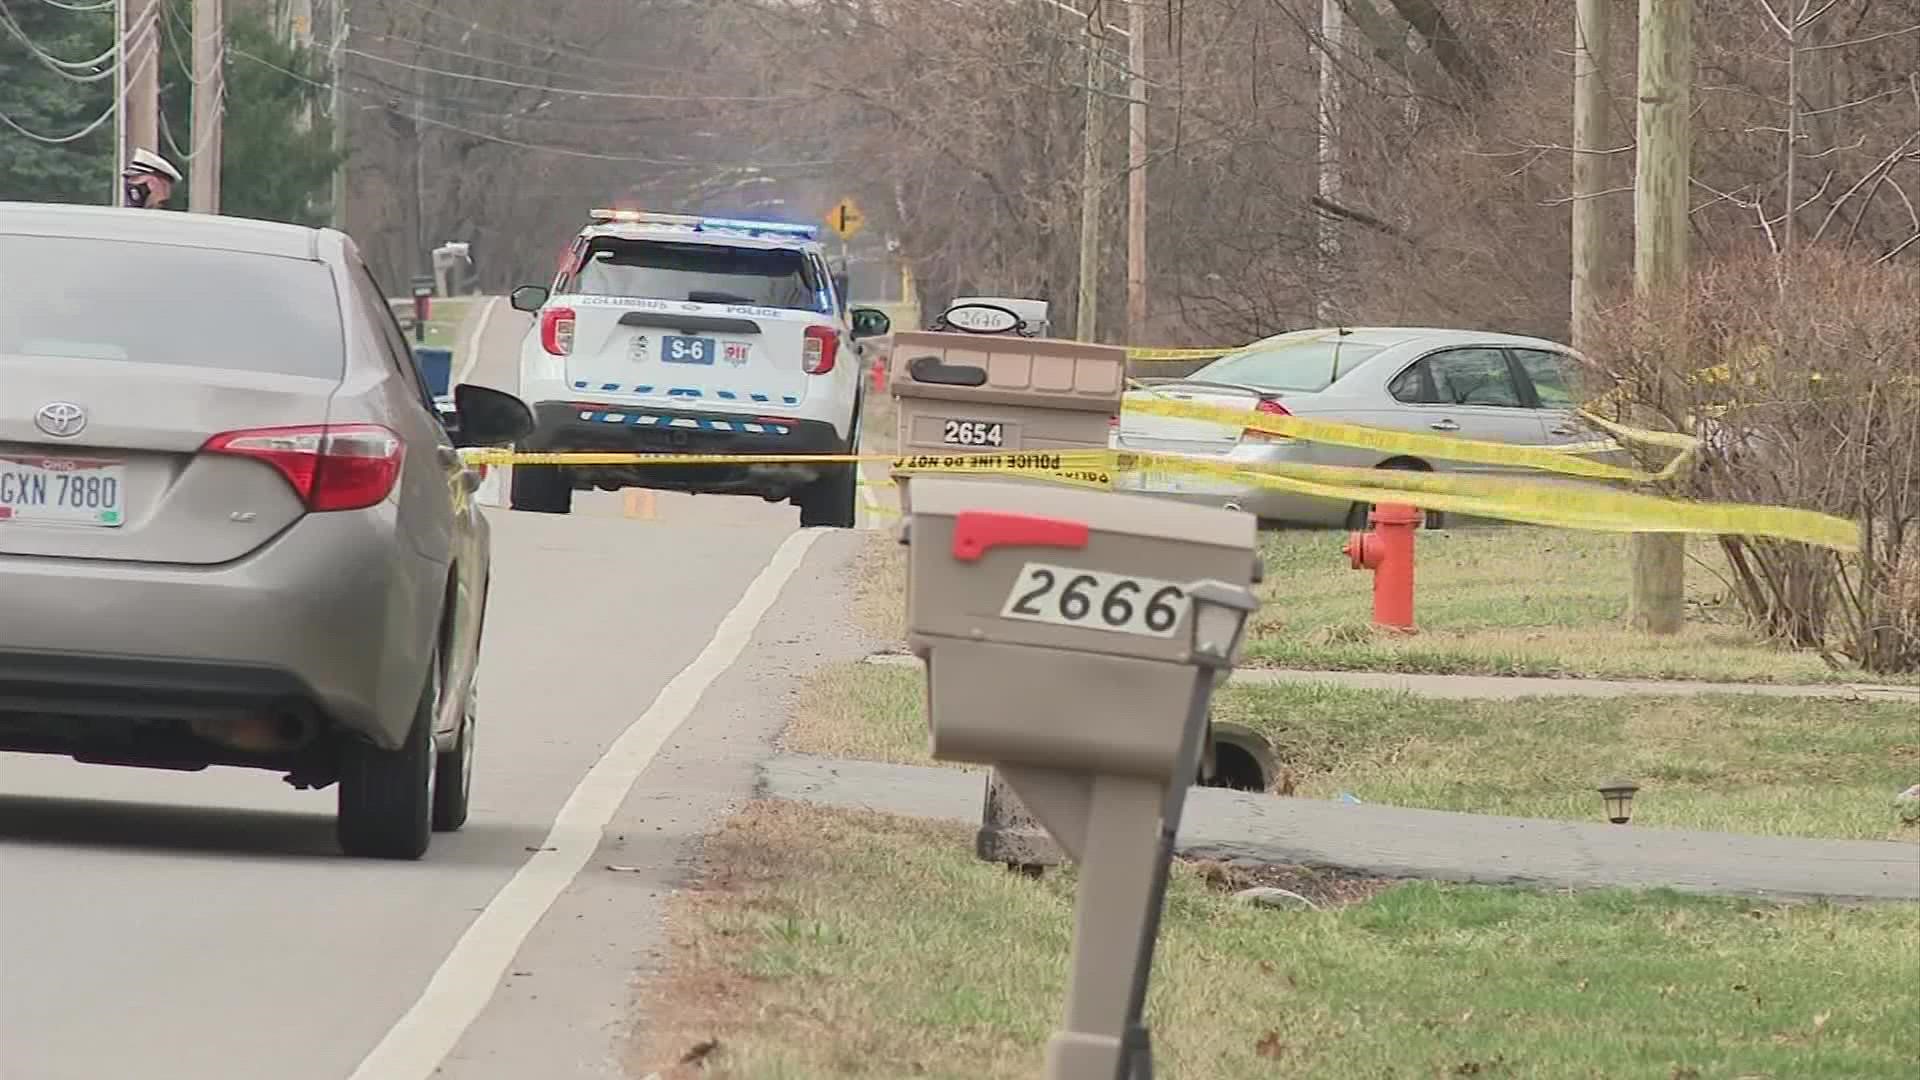 According to police, the shooting happened March 11 in the area of McCutcheon Road and Merwyn Hill Drive just west of Stelzer Road.